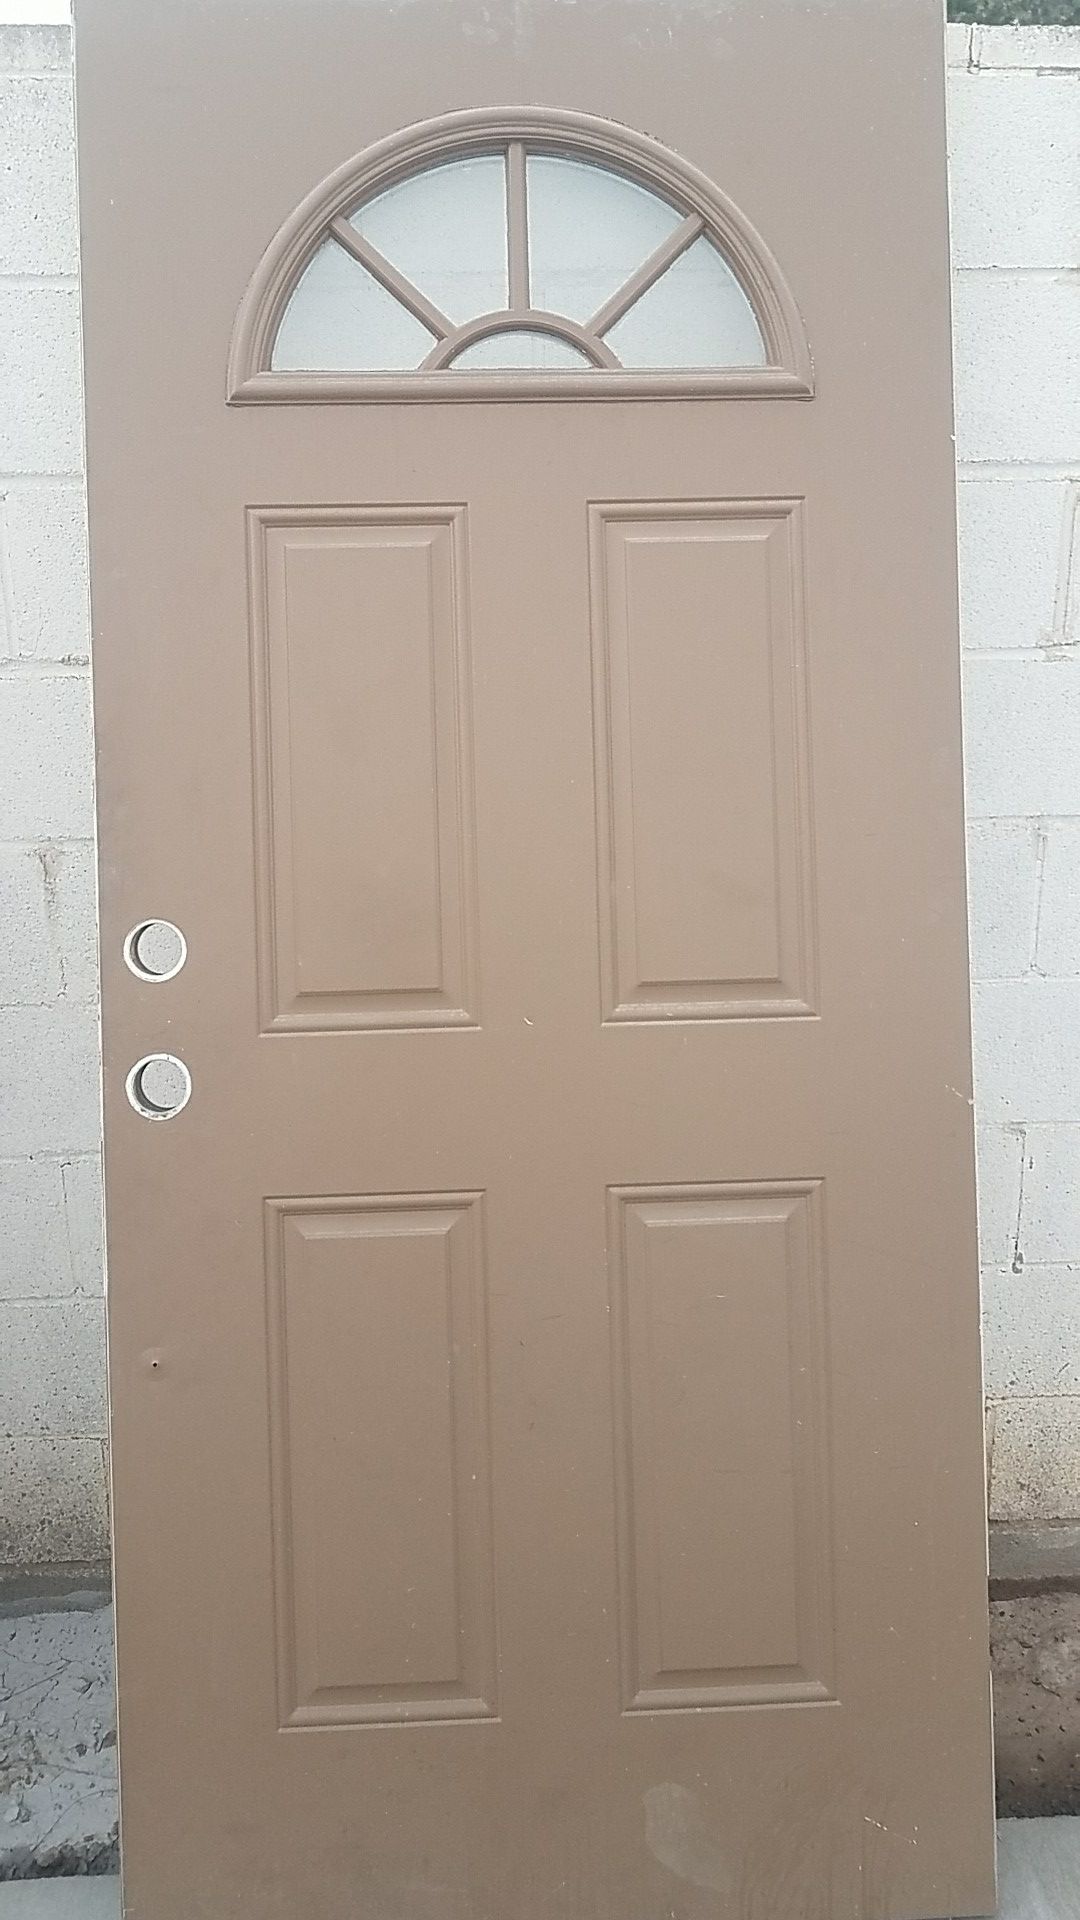 36 x 80 entry door brown and white